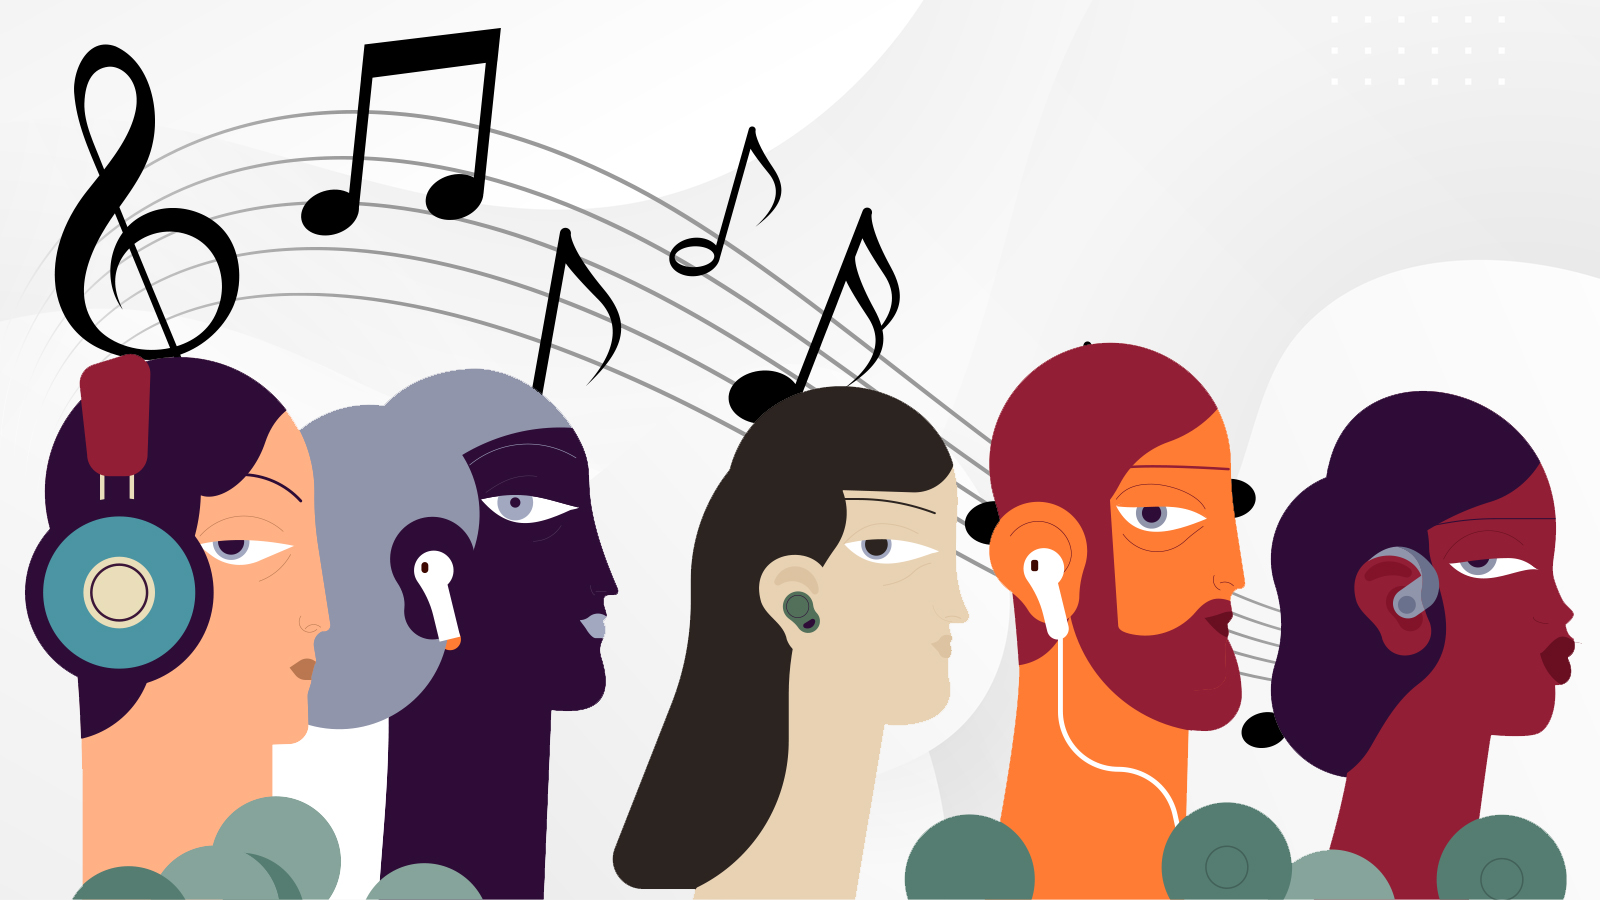 Illustration of 5 people listening to music, with music notes above them